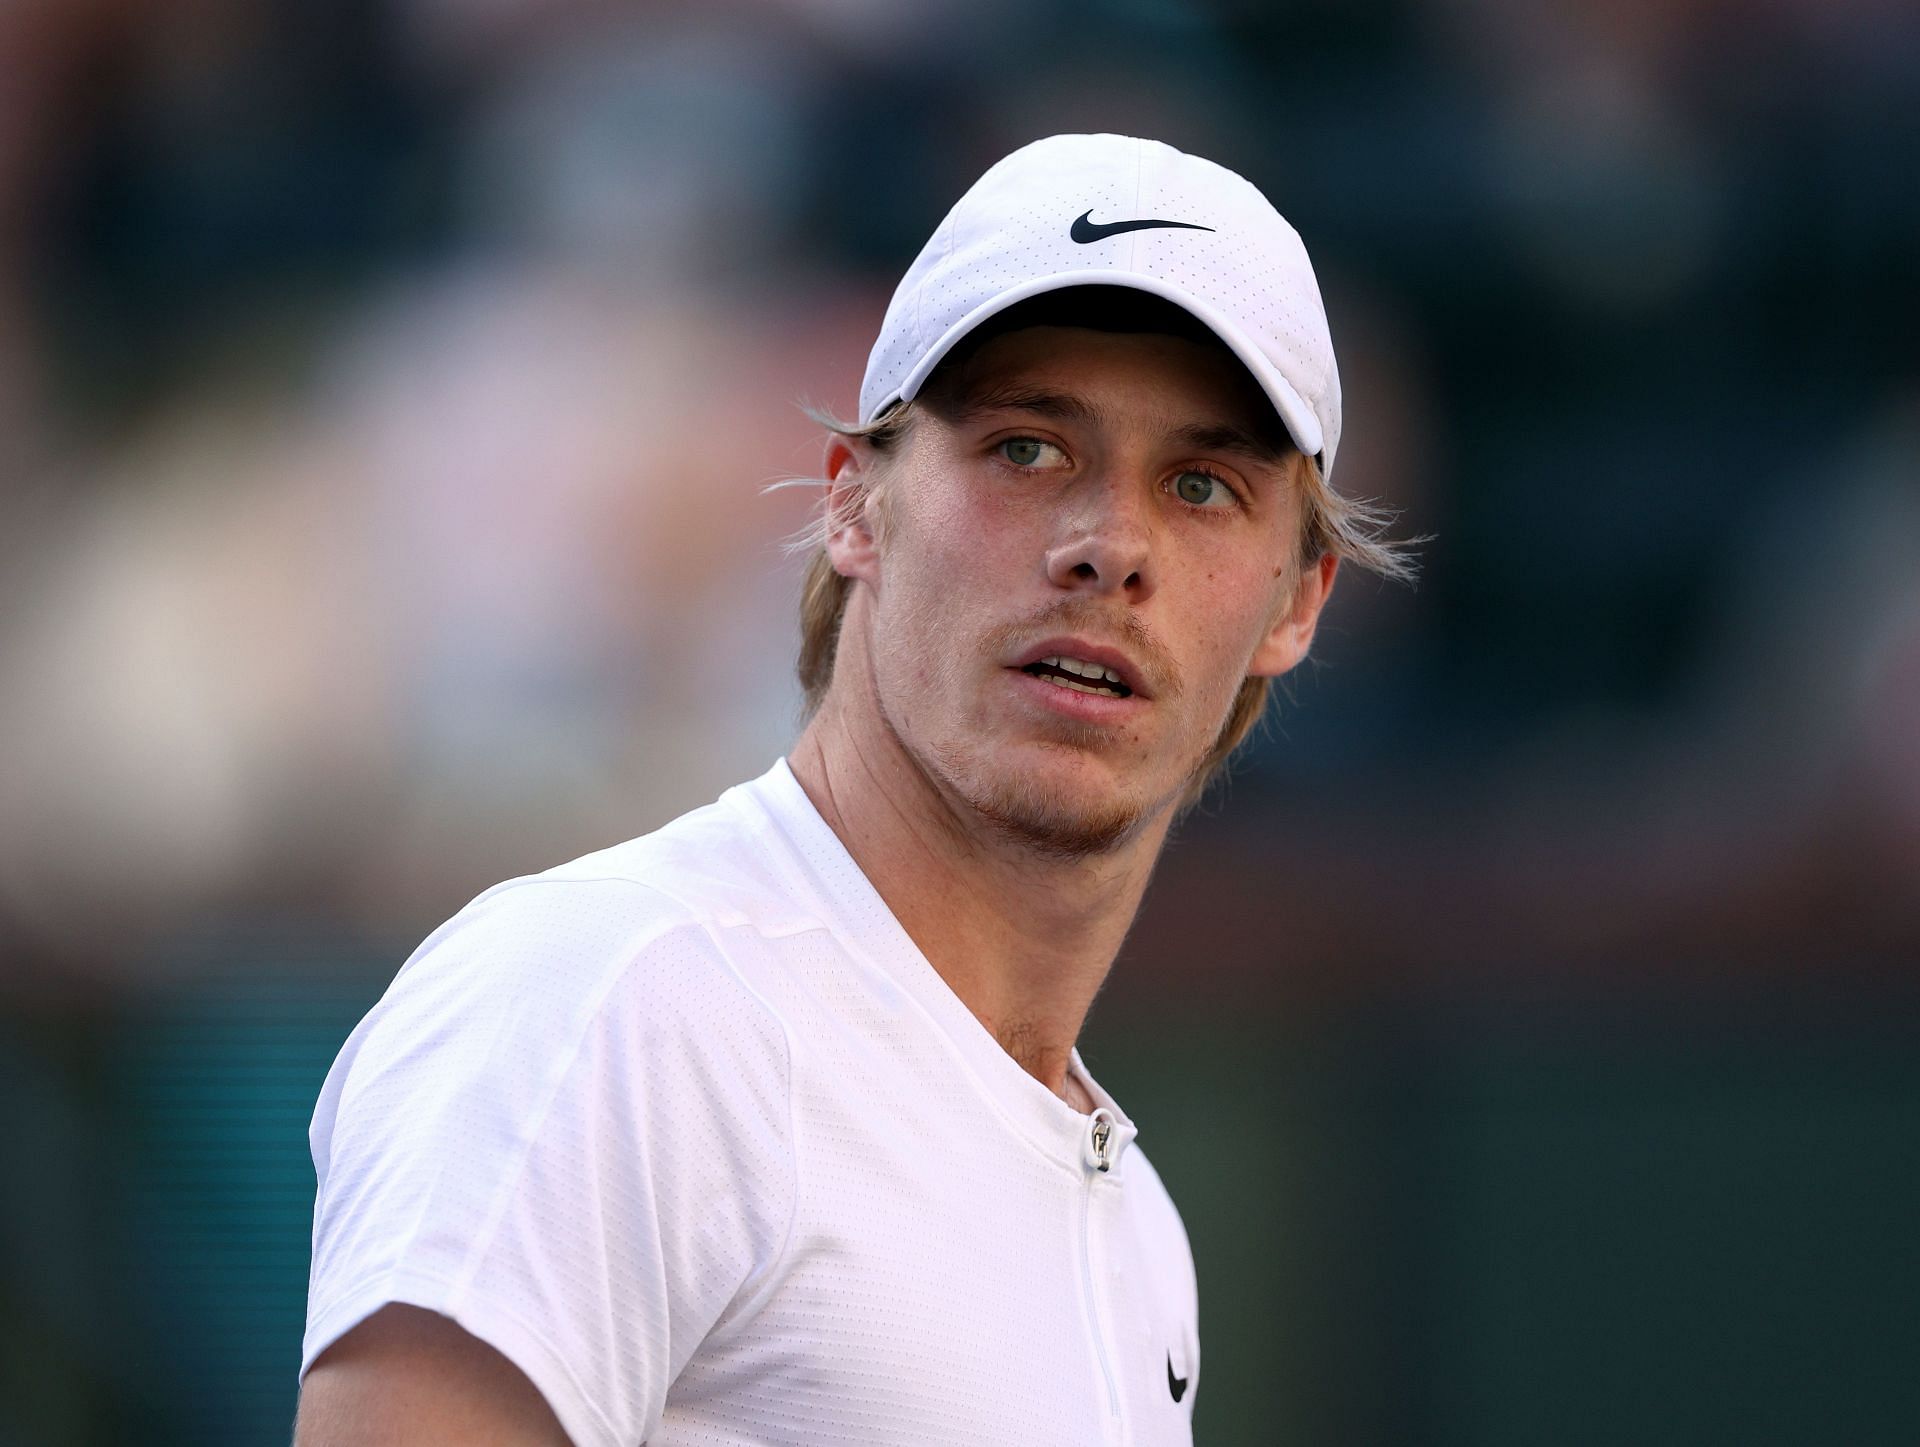 Denis Shapovalov reacts during his match against Reilly Opelka at Indian Wells